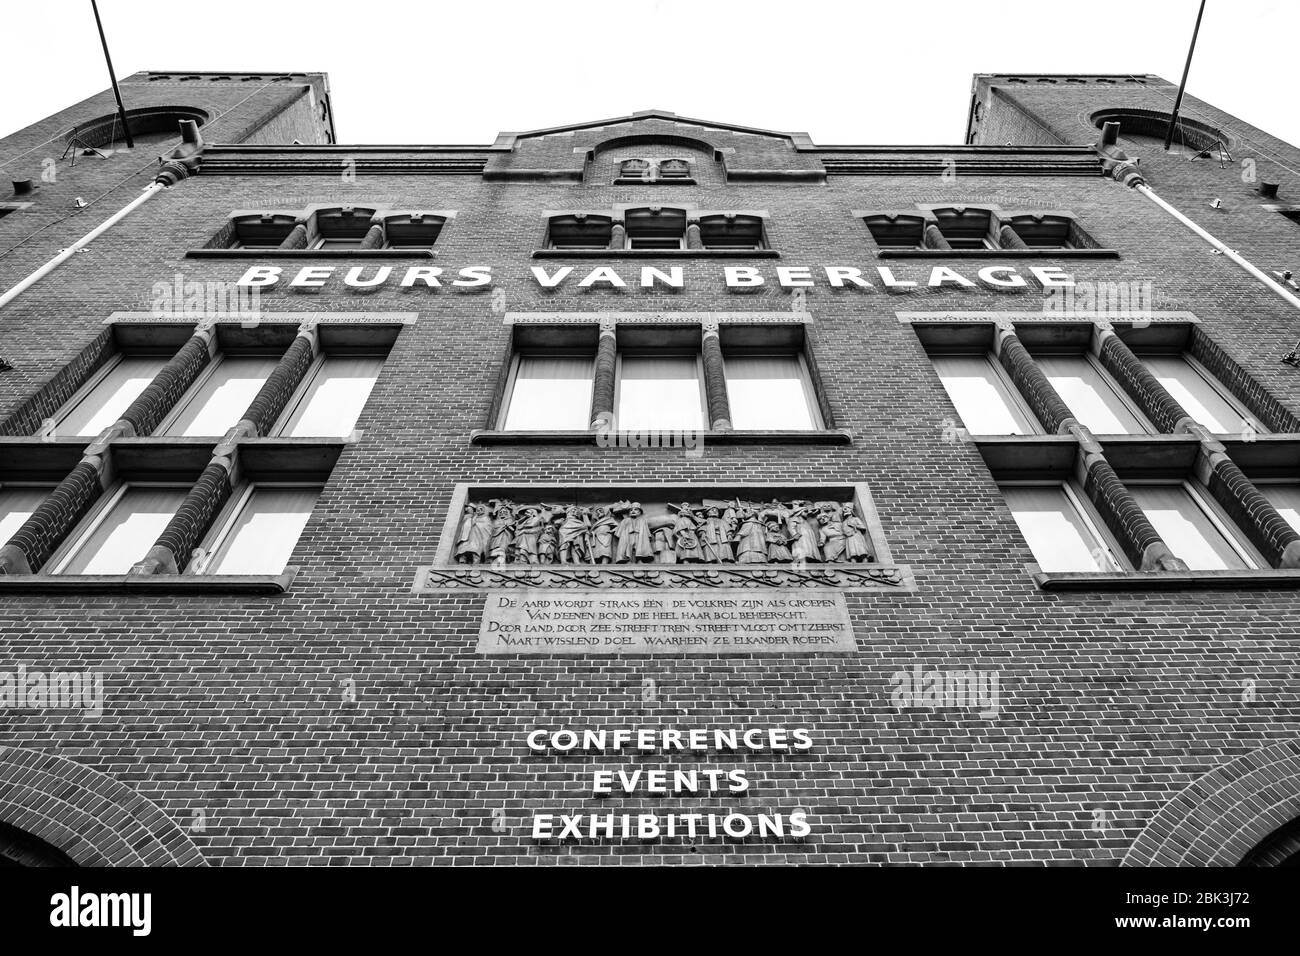 Amsterdam / Netherlands - October 15, 2018: Beurs van Berlage building in Amsterdam, capital of Netherlands, used as a venue for concerts, exhibitions Stock Photo